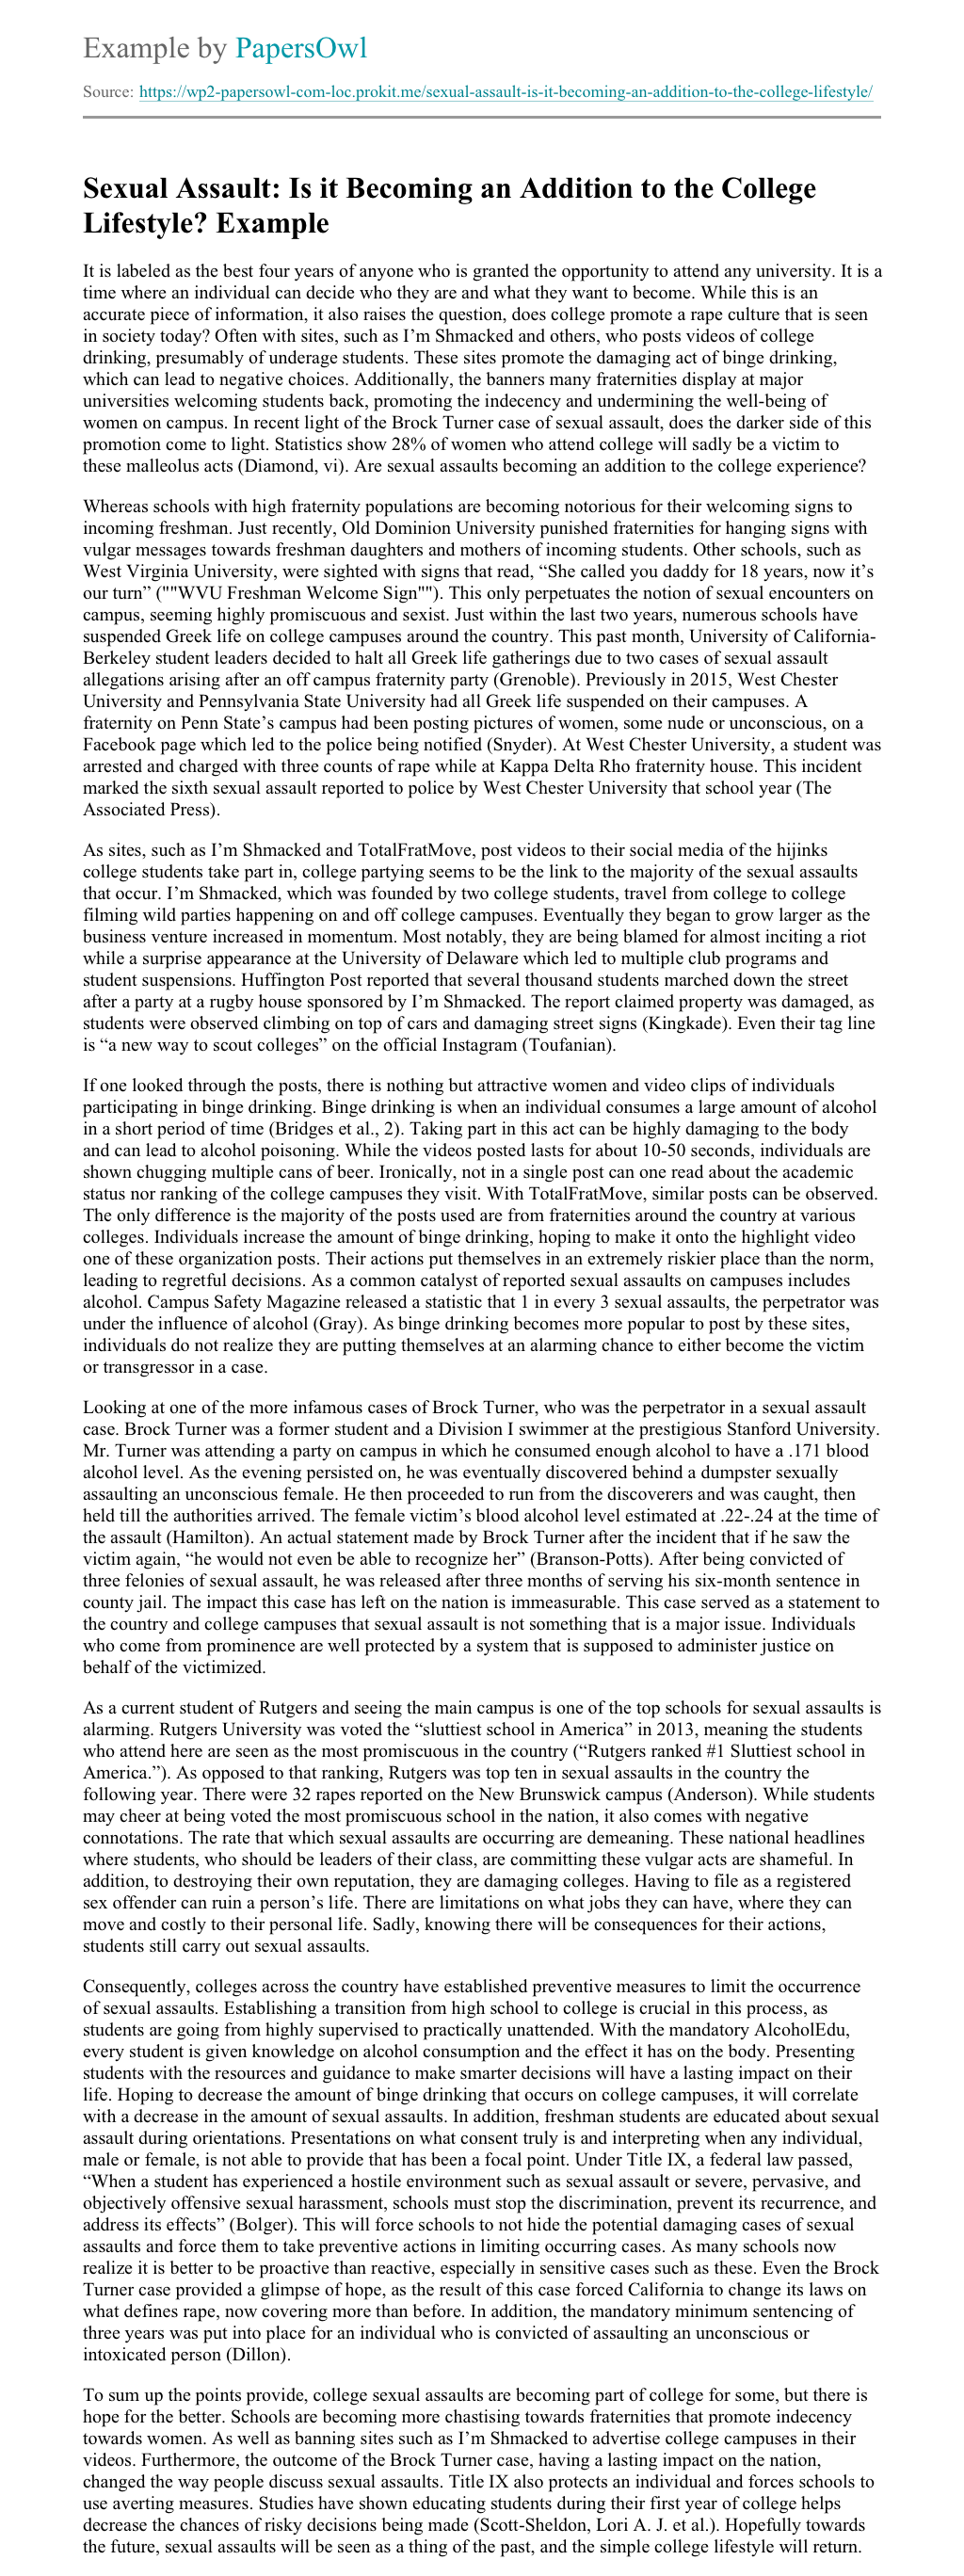 essay about sexual assault